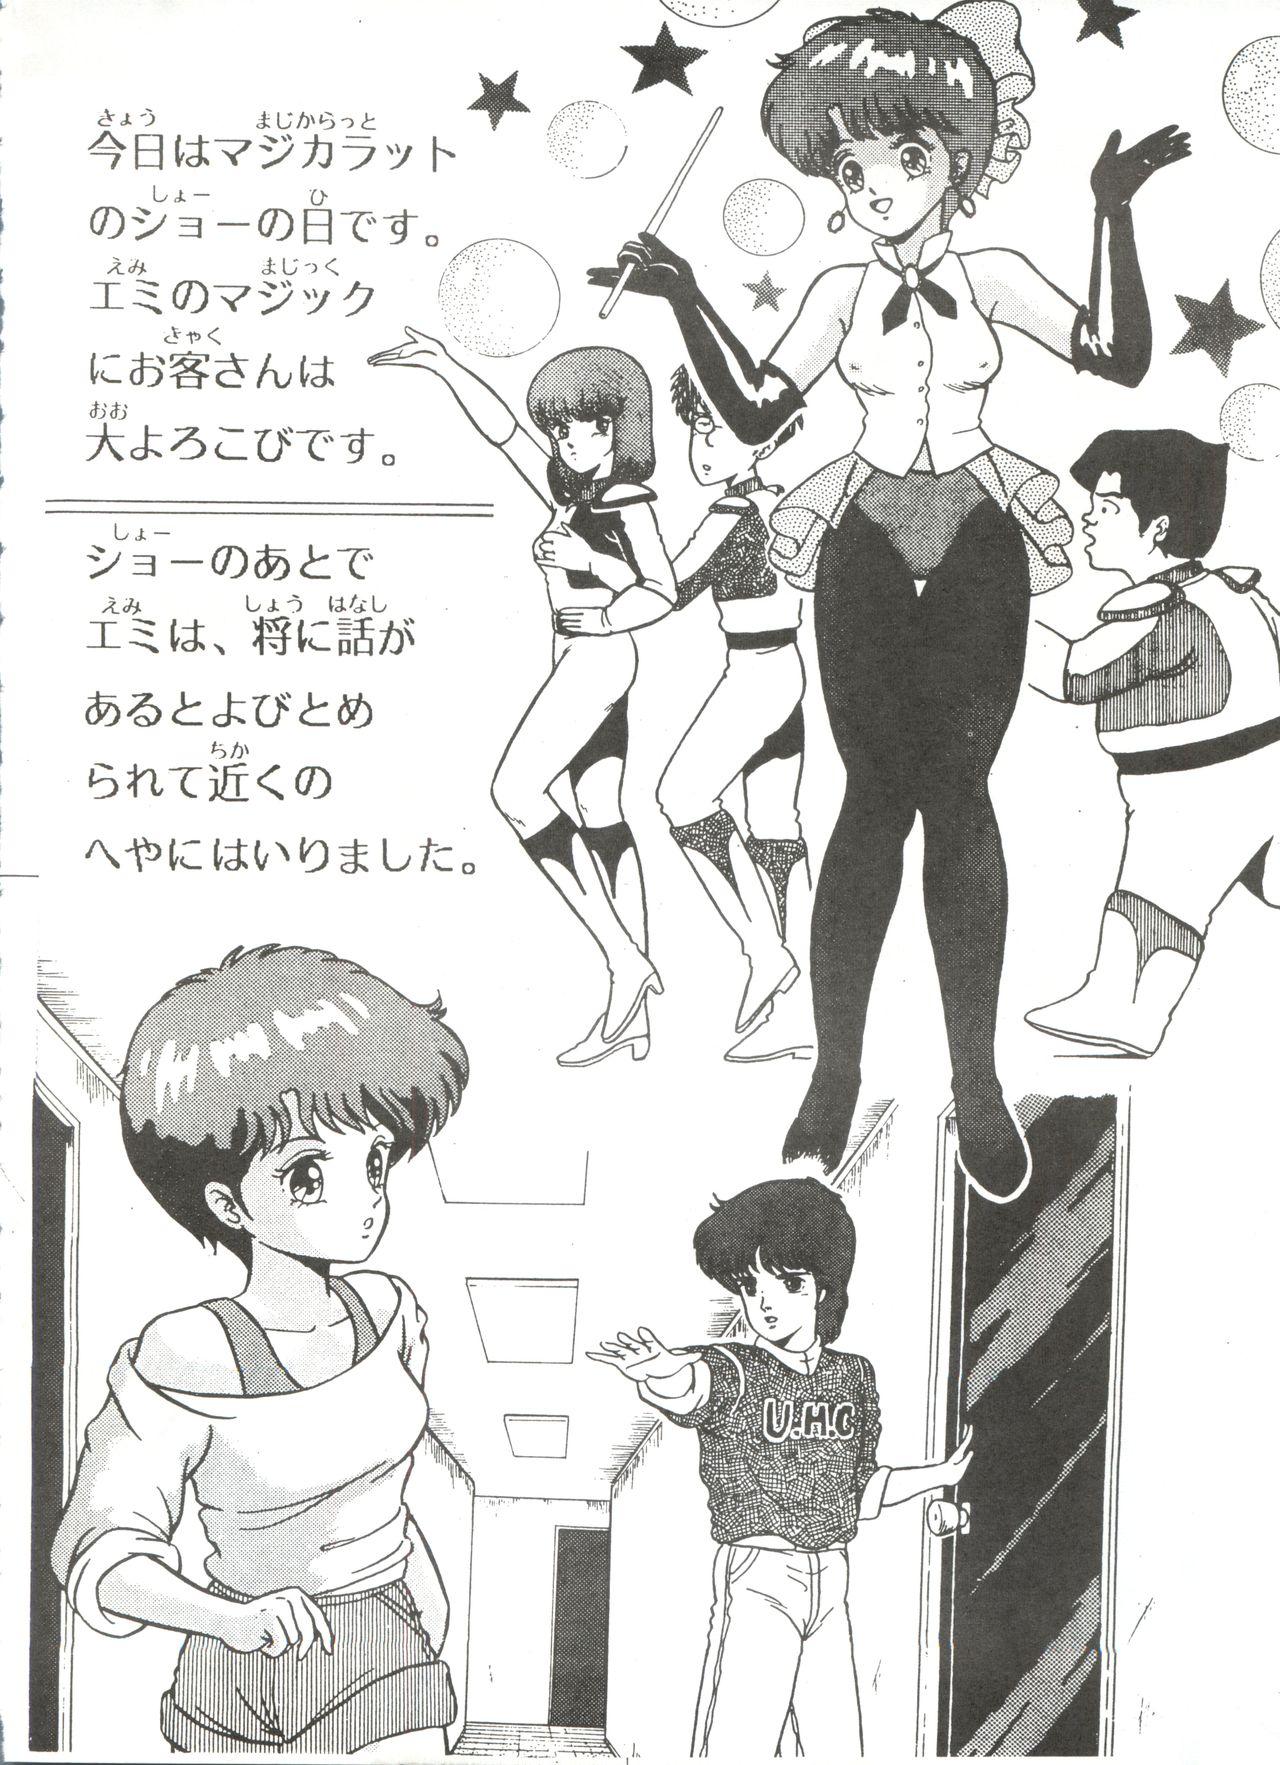 Sensual Look Out 3R - Maison ikkoku Magical emi Gundam zz The super dimension fortress macross Sola - Page 6